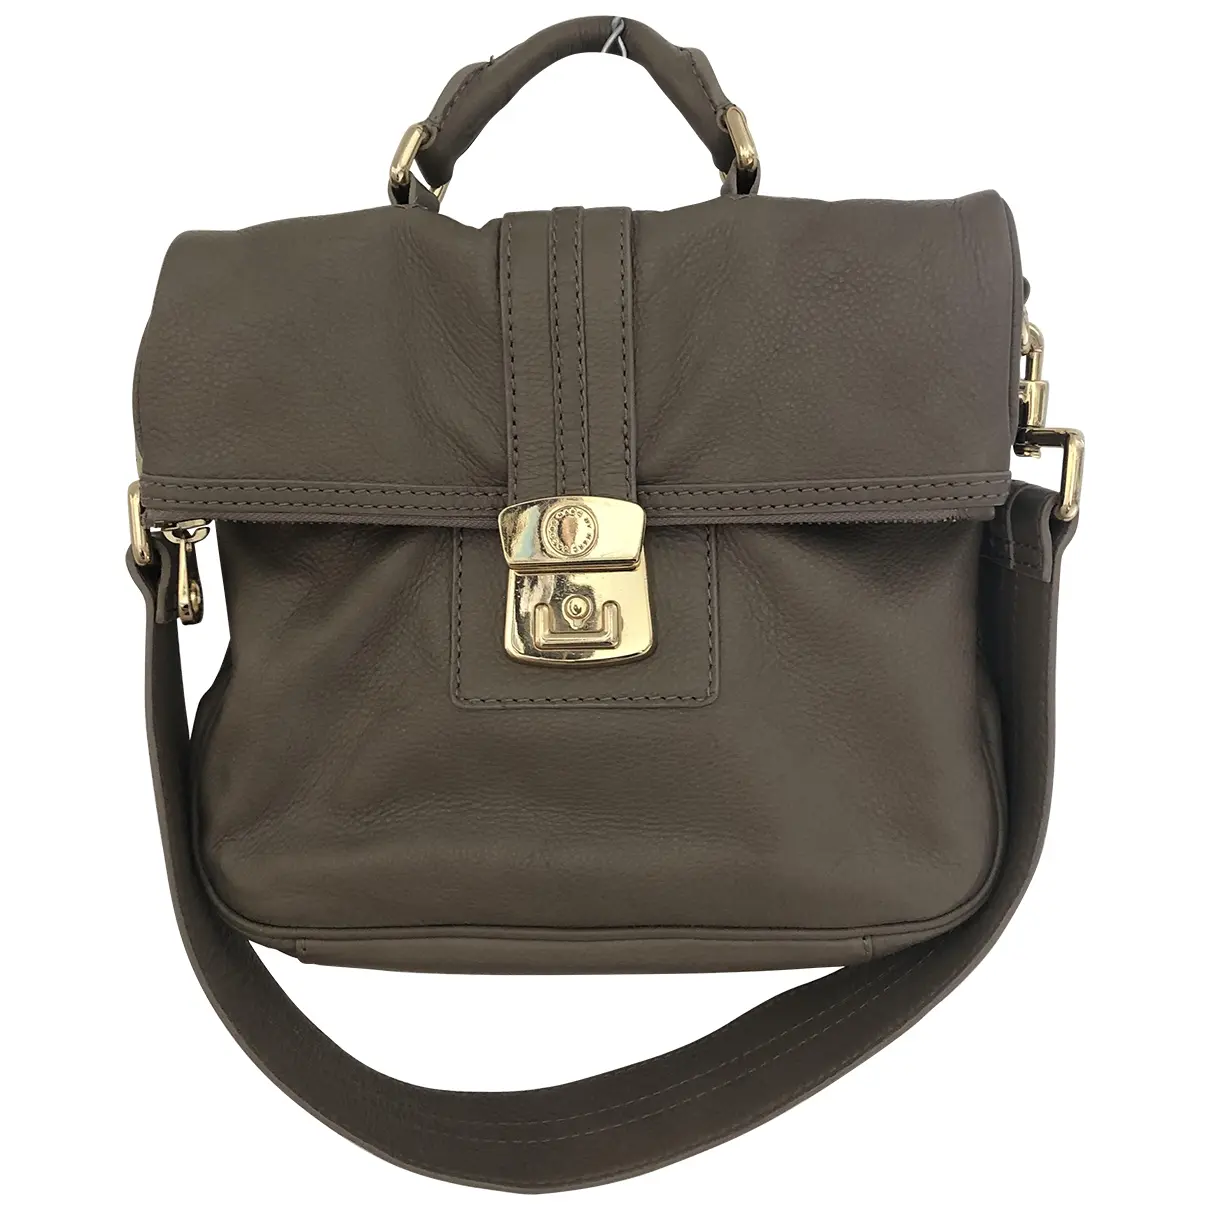 Leather handbag Marc by Marc Jacobs